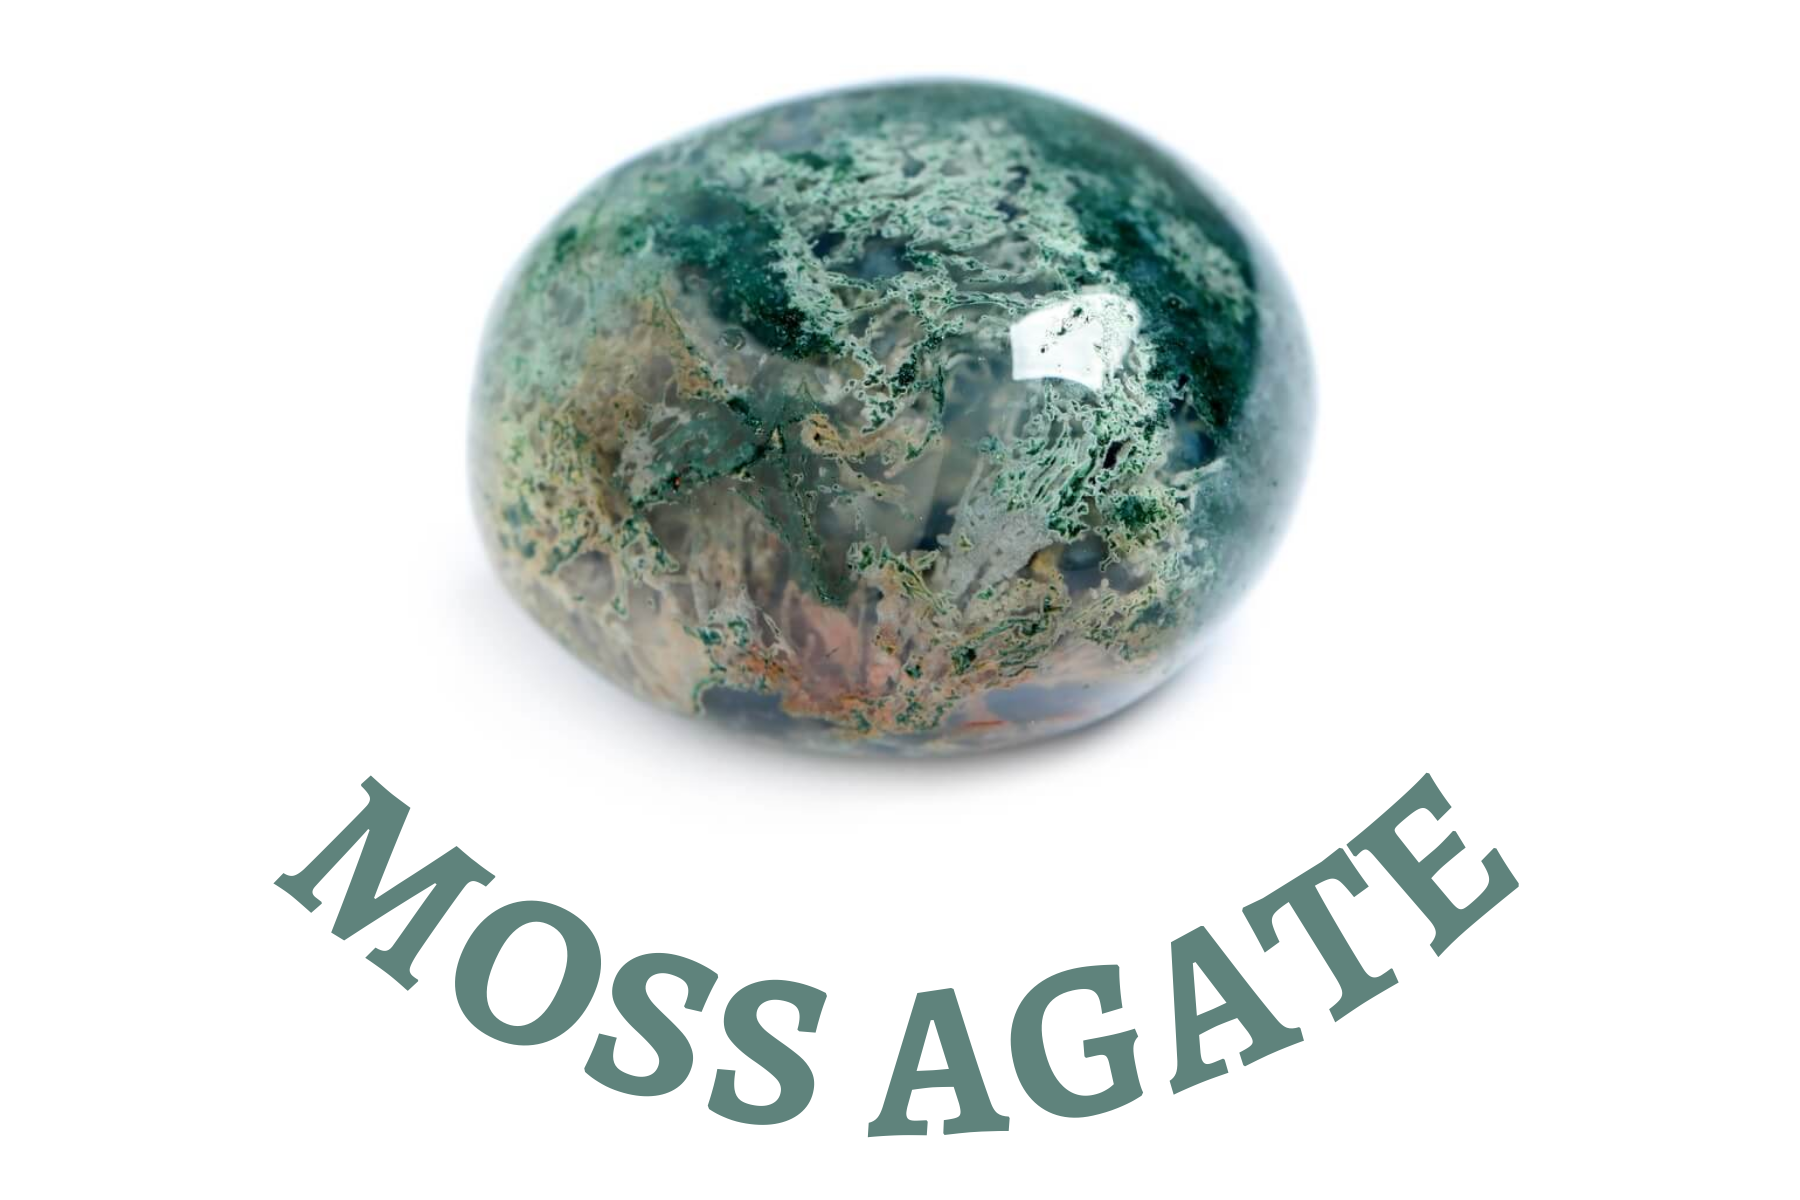 Green Moss agate with visible patterns inside